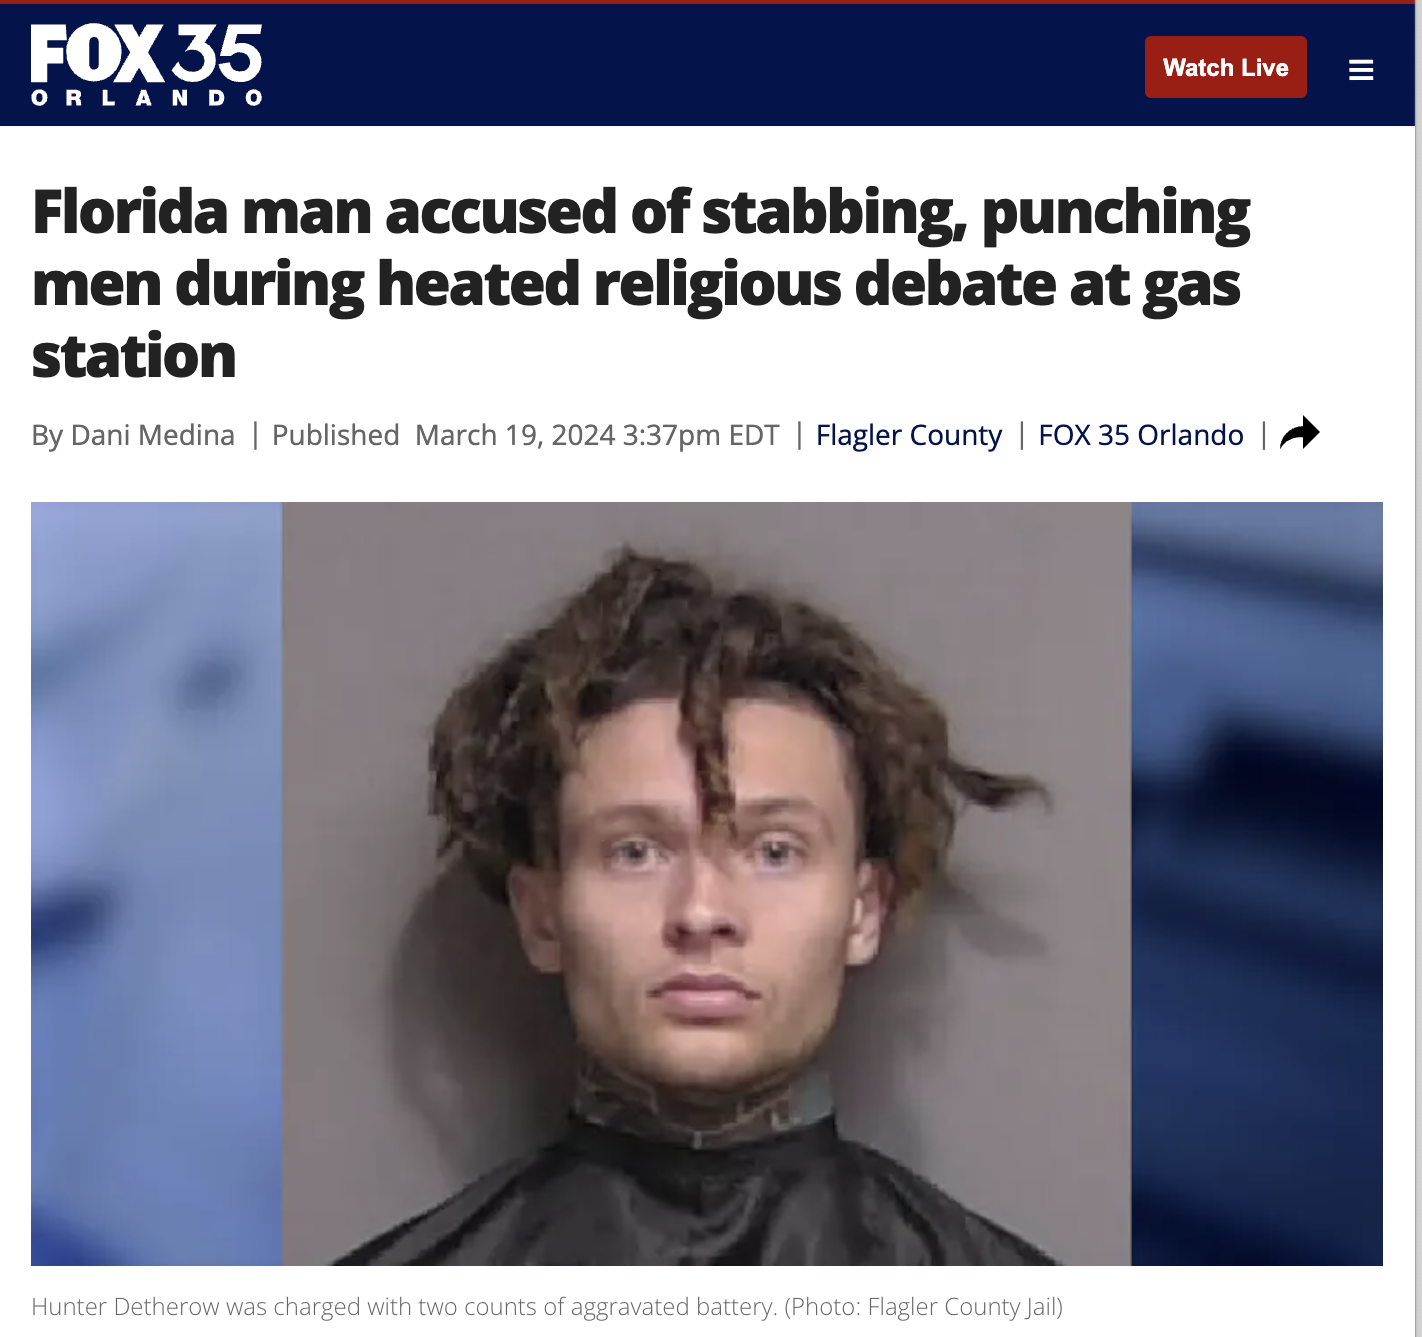 photo caption - Fox 35 Orlando Watch Live Florida man accused of stabbing, punching men during heated religious debate at gas station By Dani Medina | Published pm Edt | Flagler County | Fox 35 Orlando Hunter Detherow was charged with two counts of aggrav